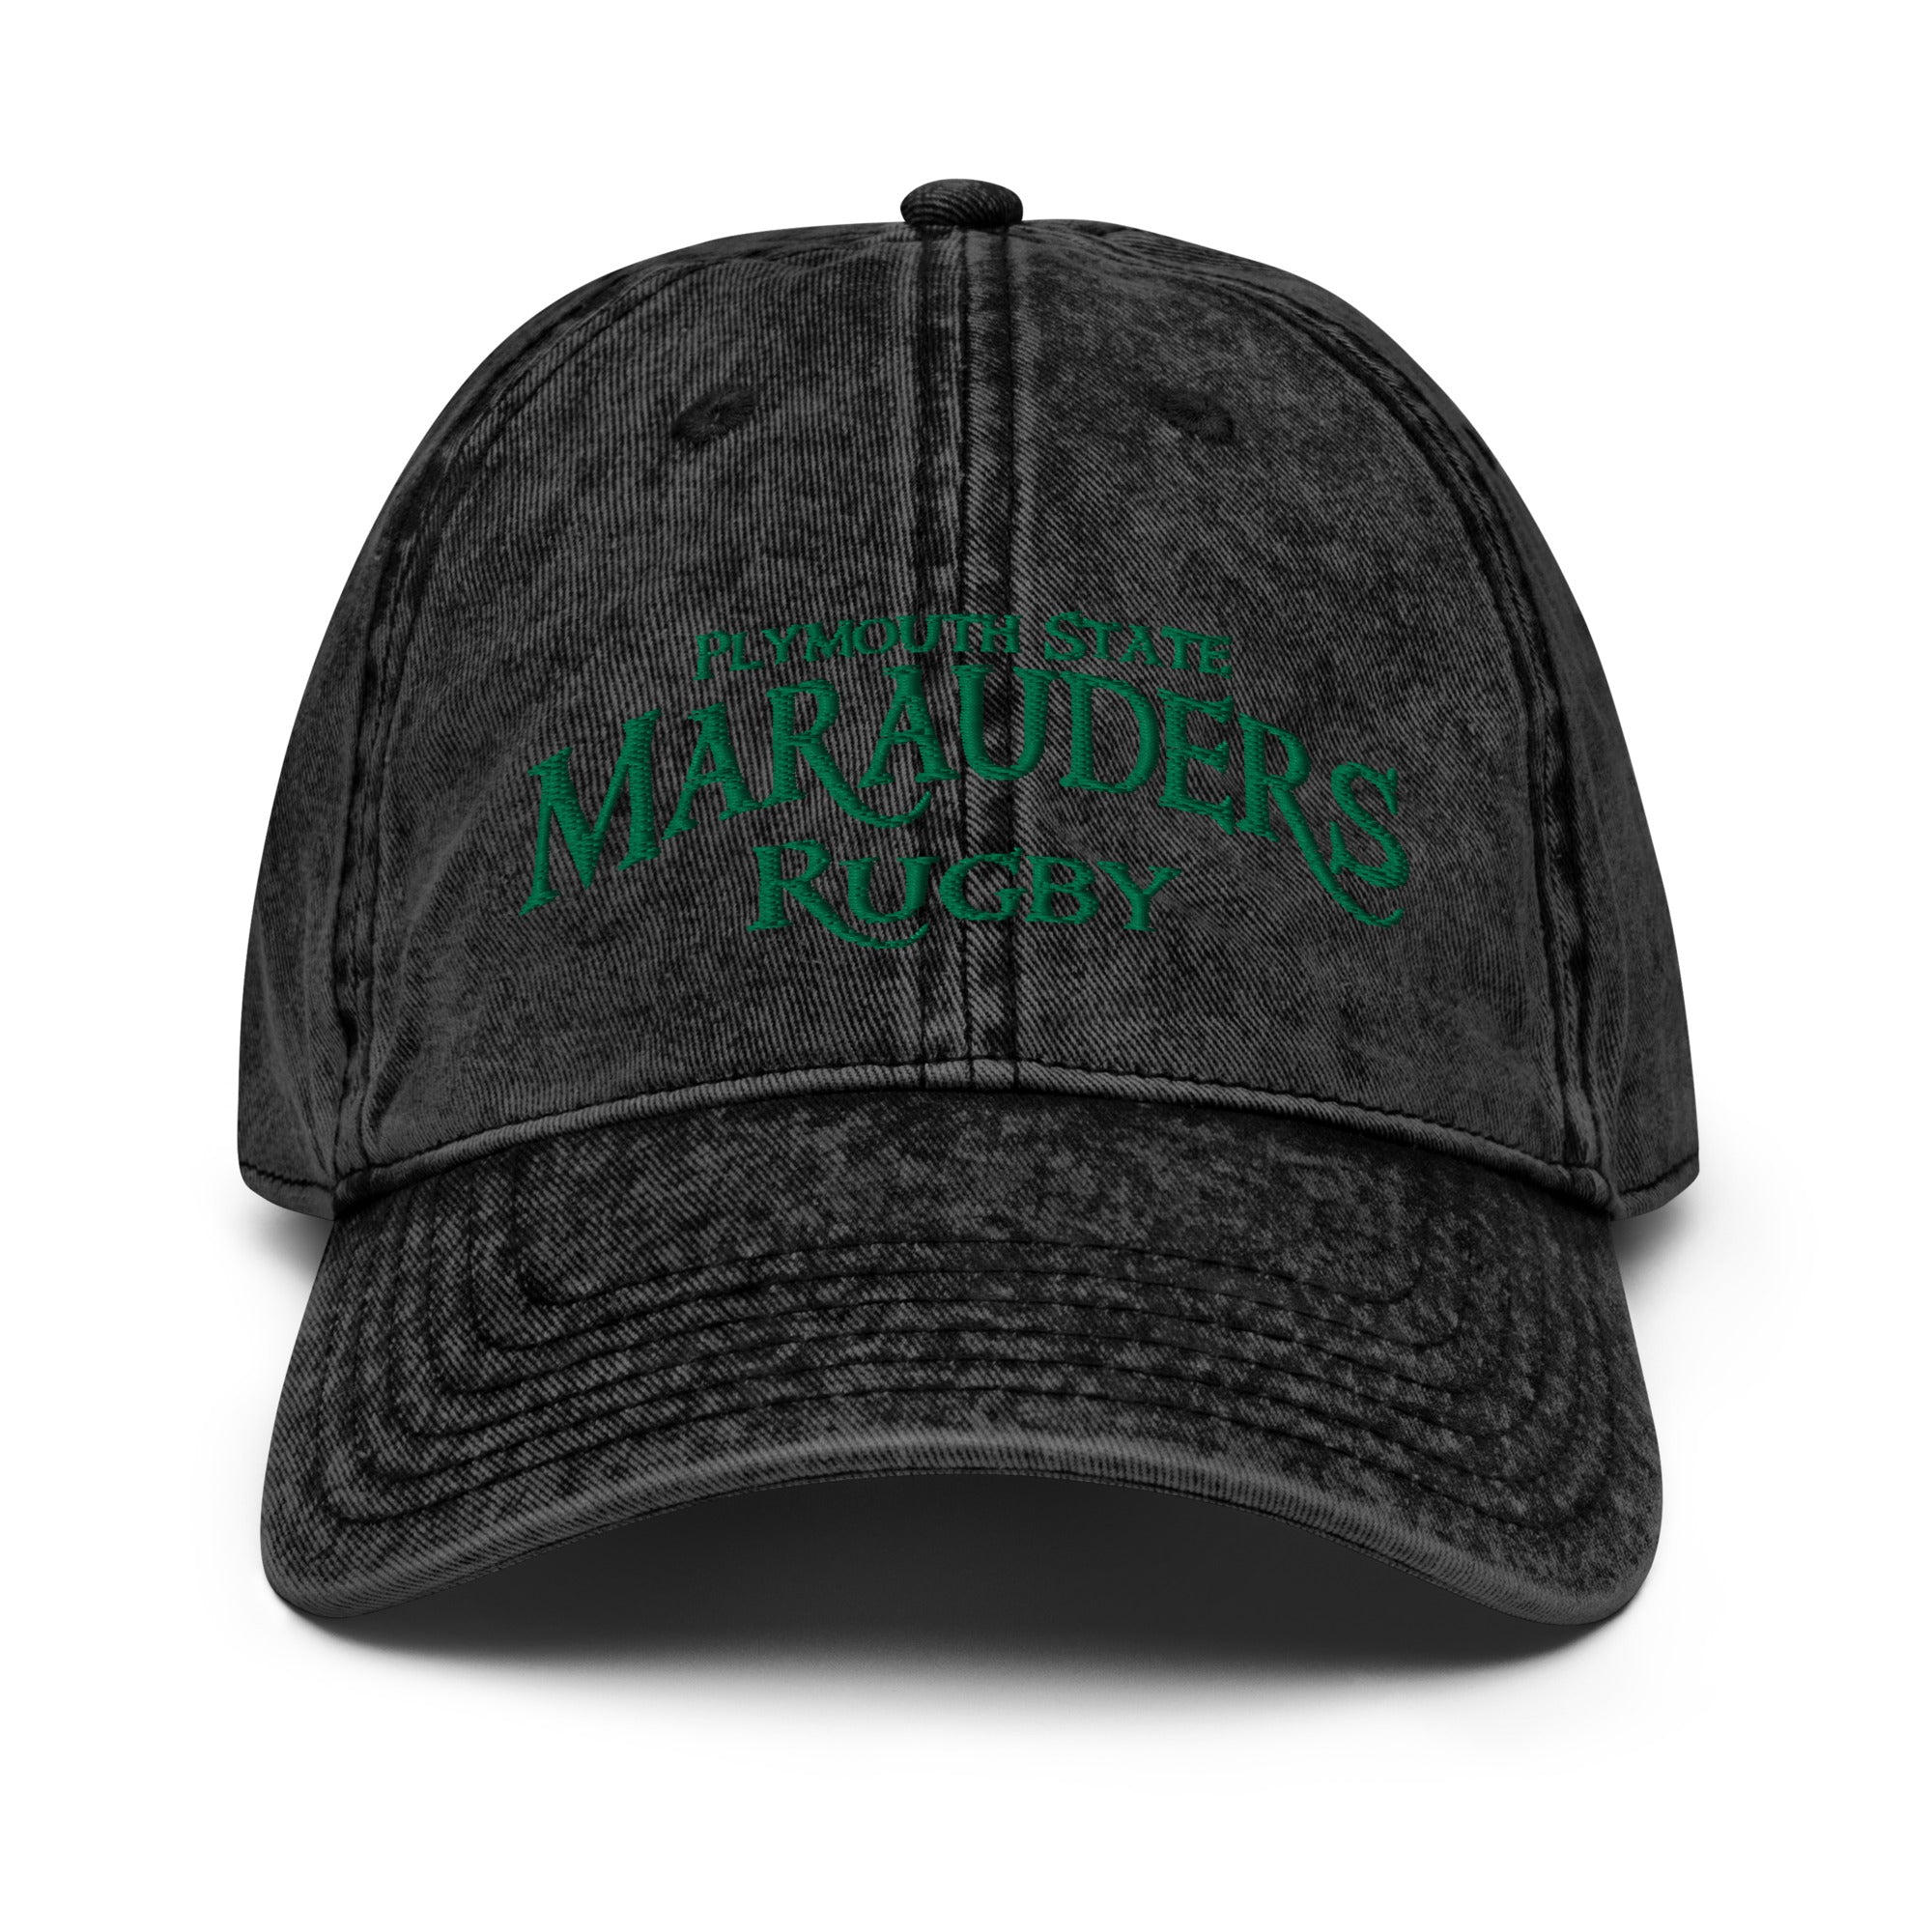 Rugby Imports Plymouth State WRFC Vintage Twill Cap